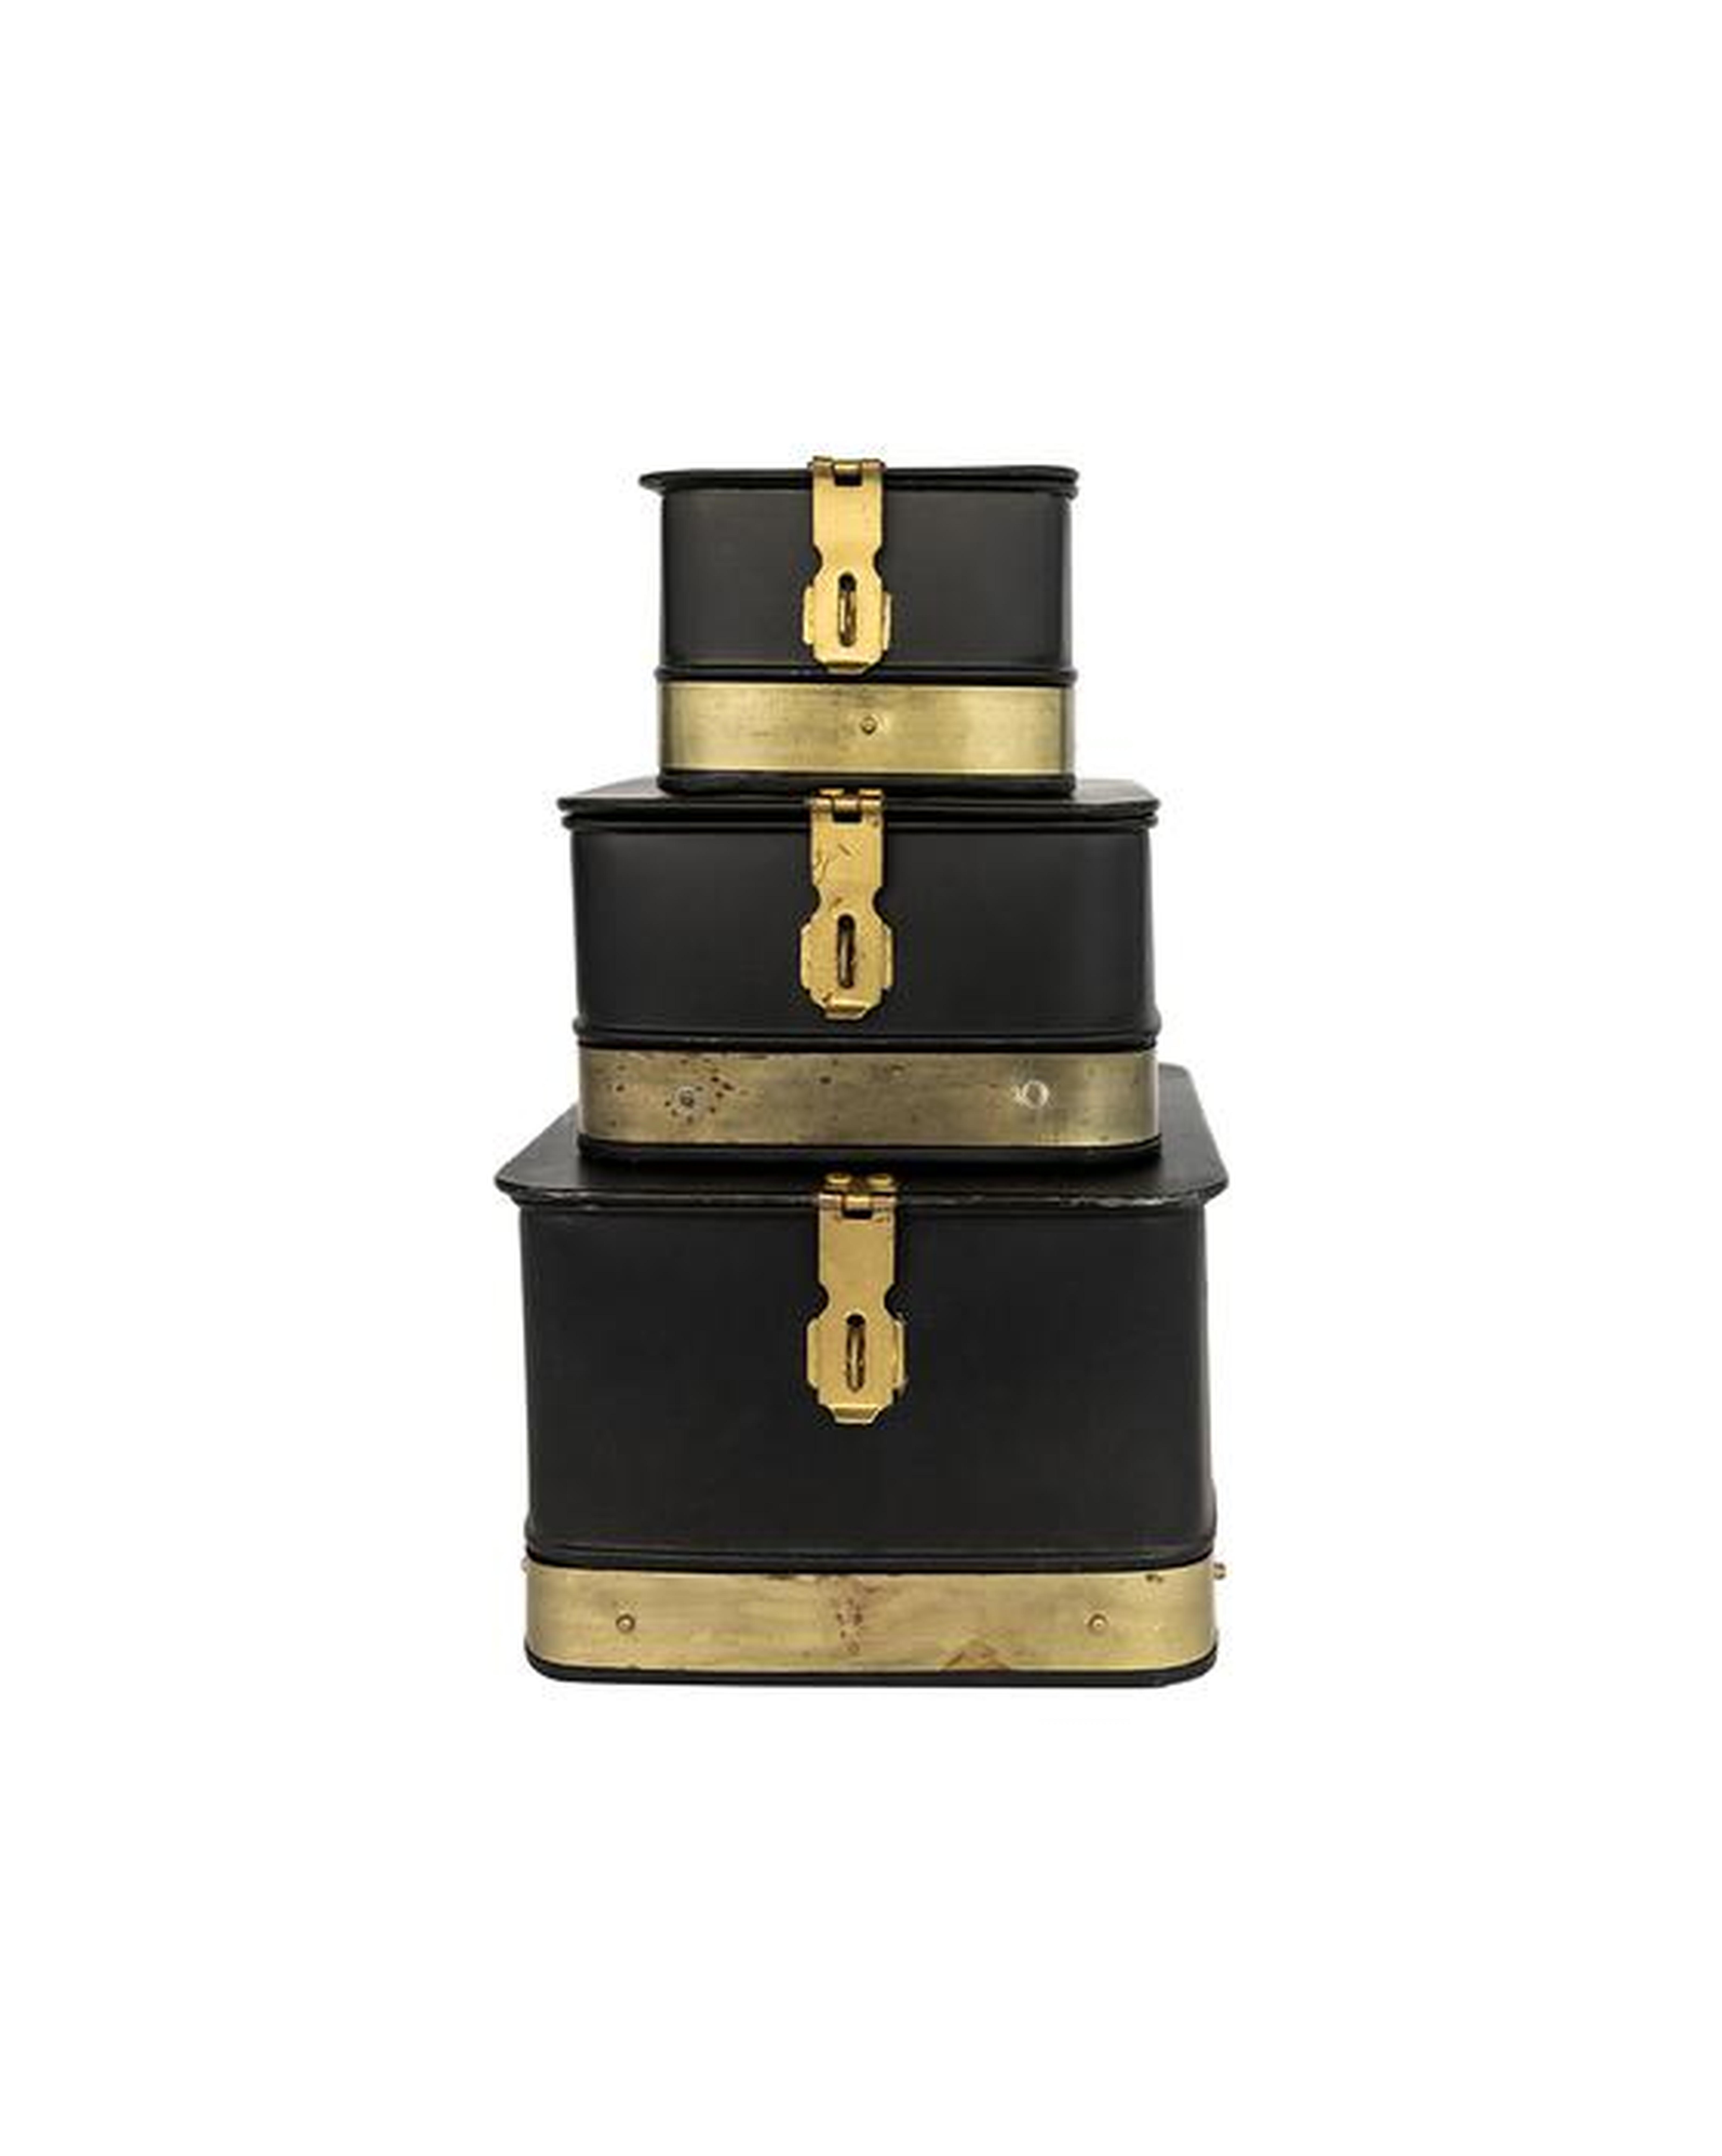 Black & Brass Galvanized Boxes (Set of 3) - McGee & Co.